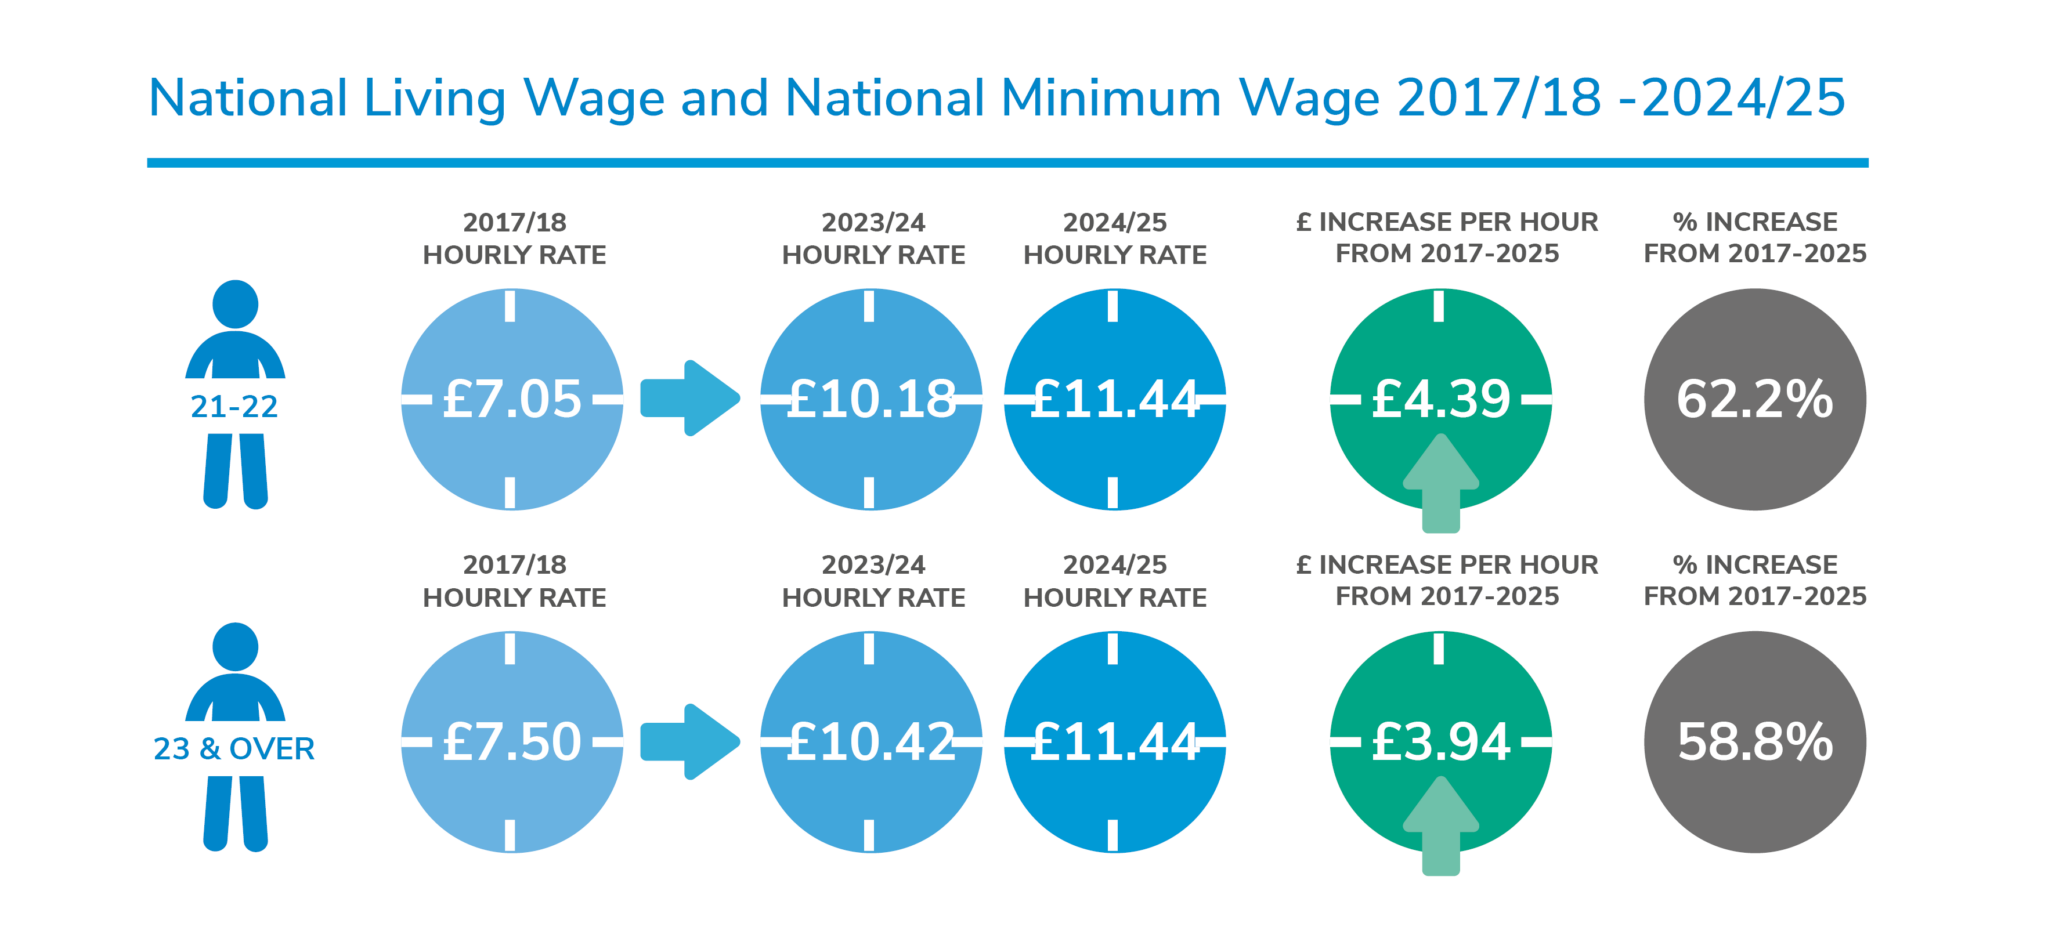 National Living Wage will rise to £11.44 per hour from April 2024 NDNA